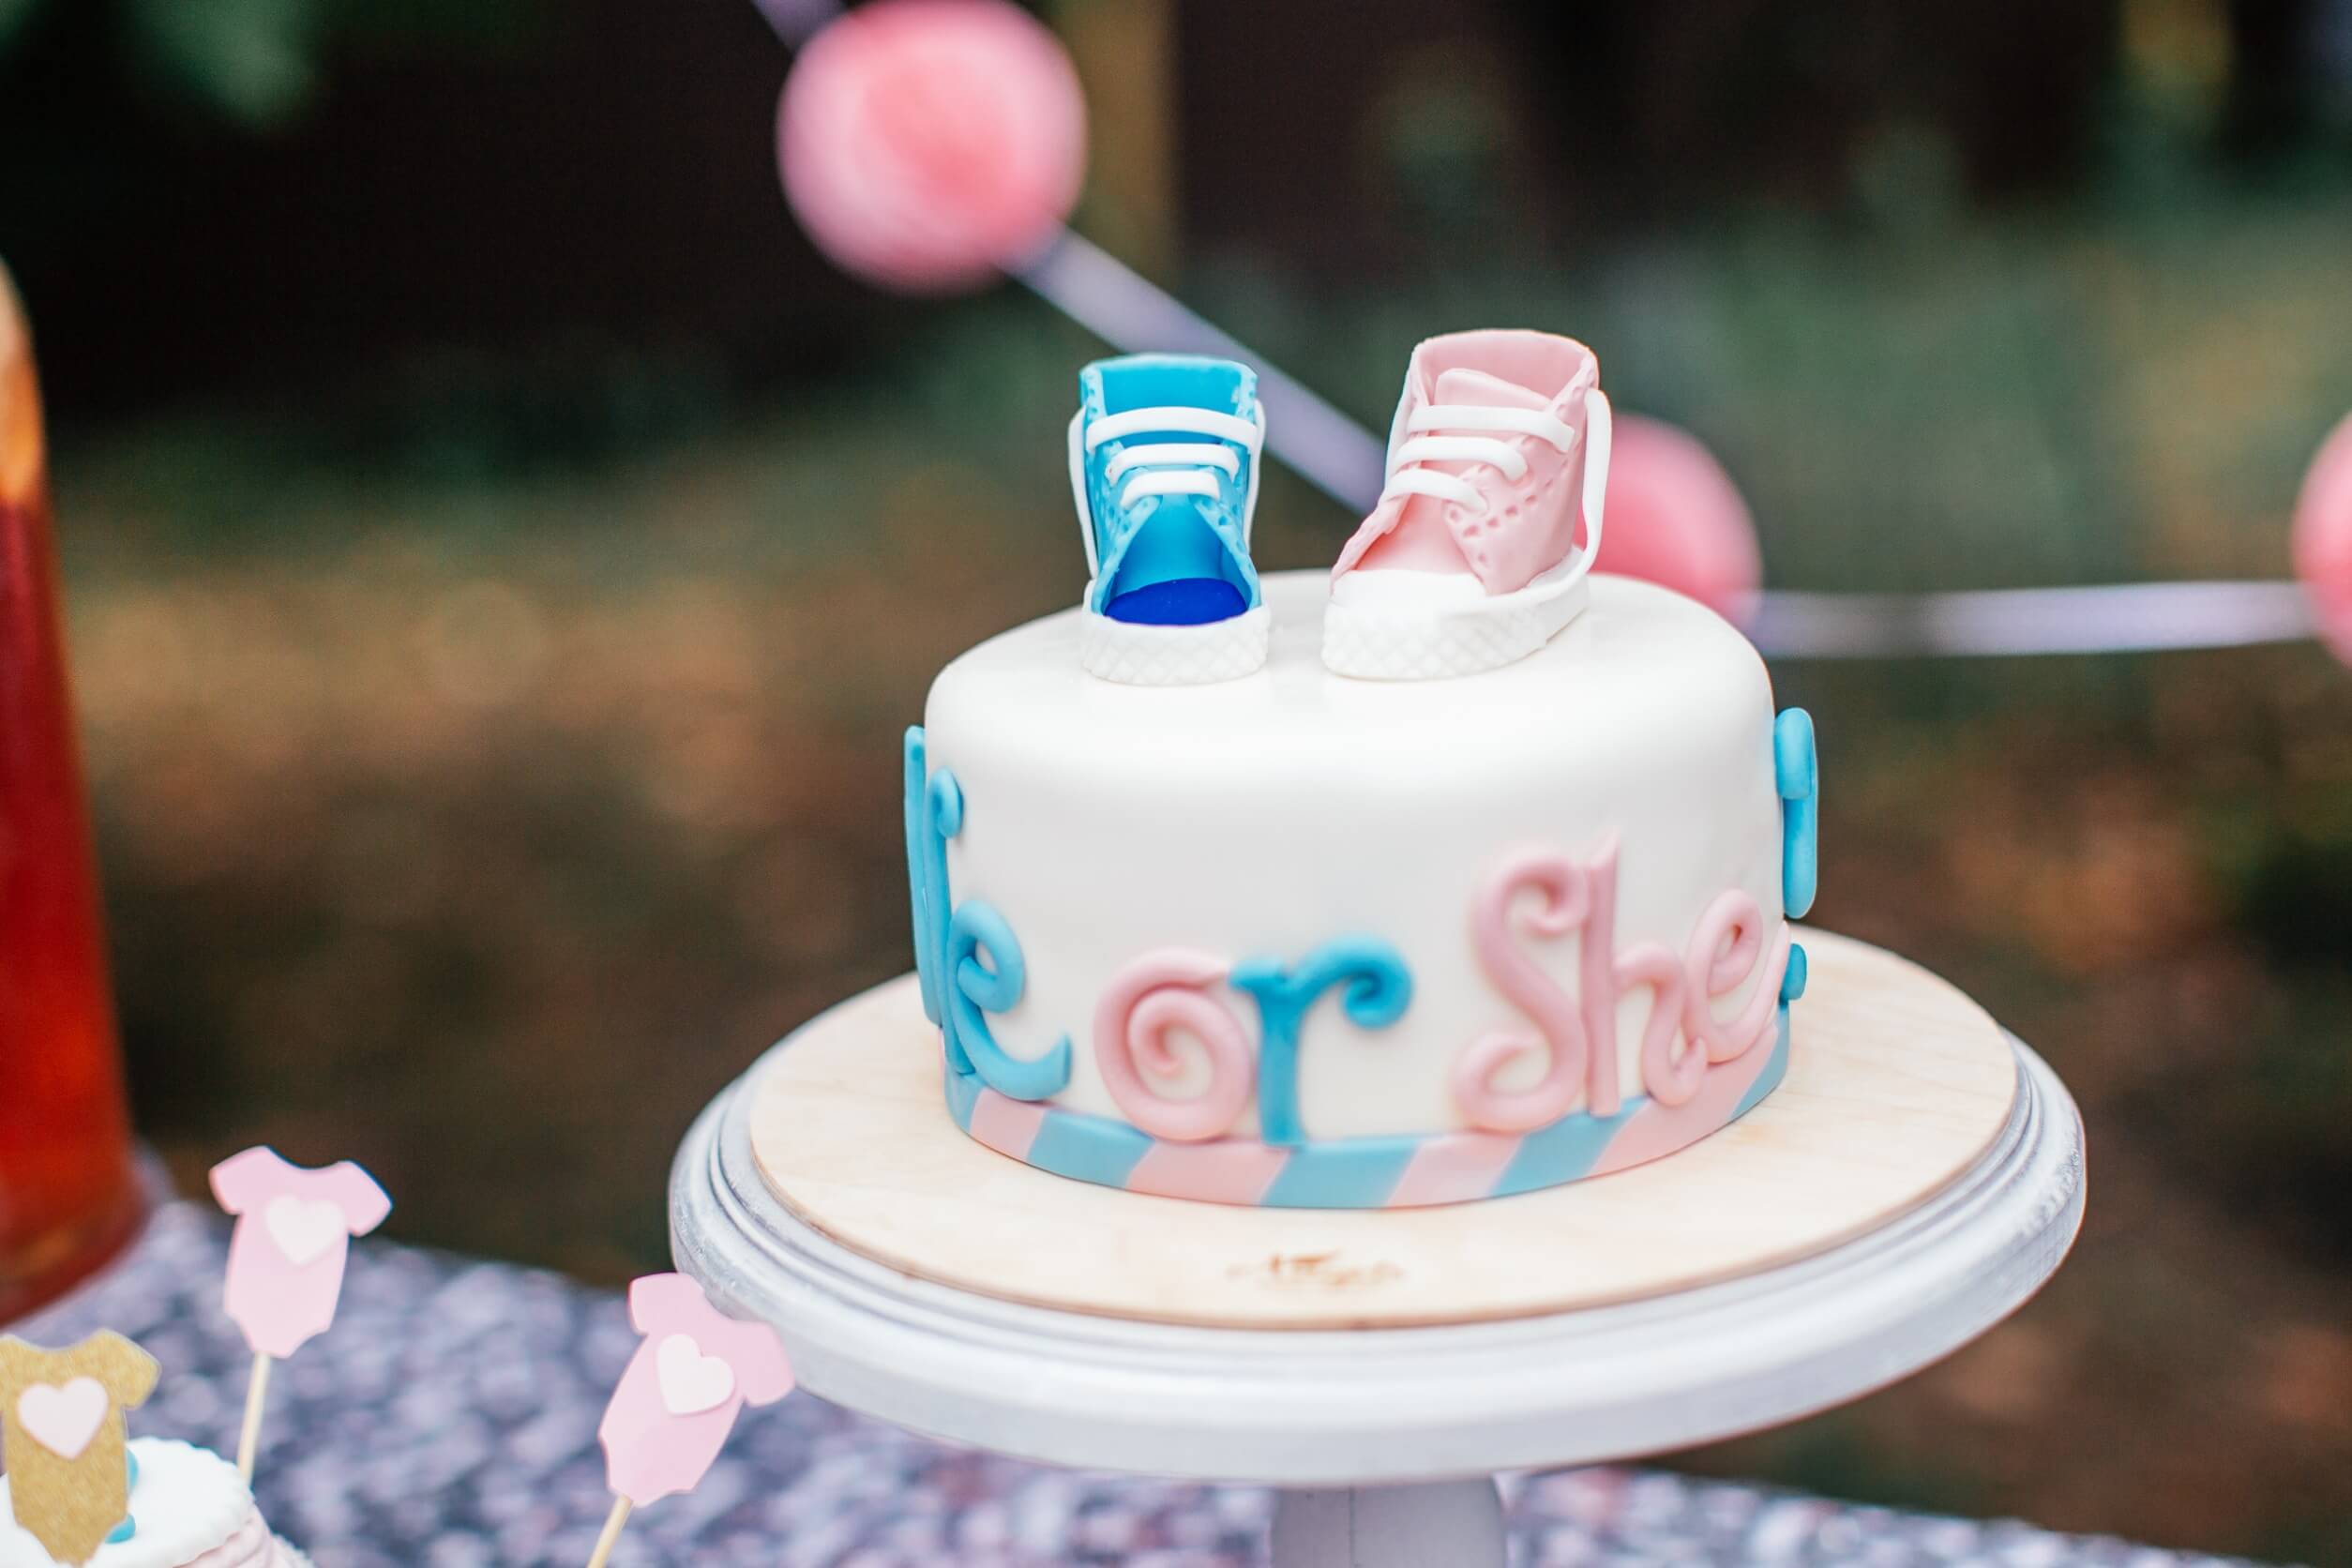 A cake for making a gender announcement.